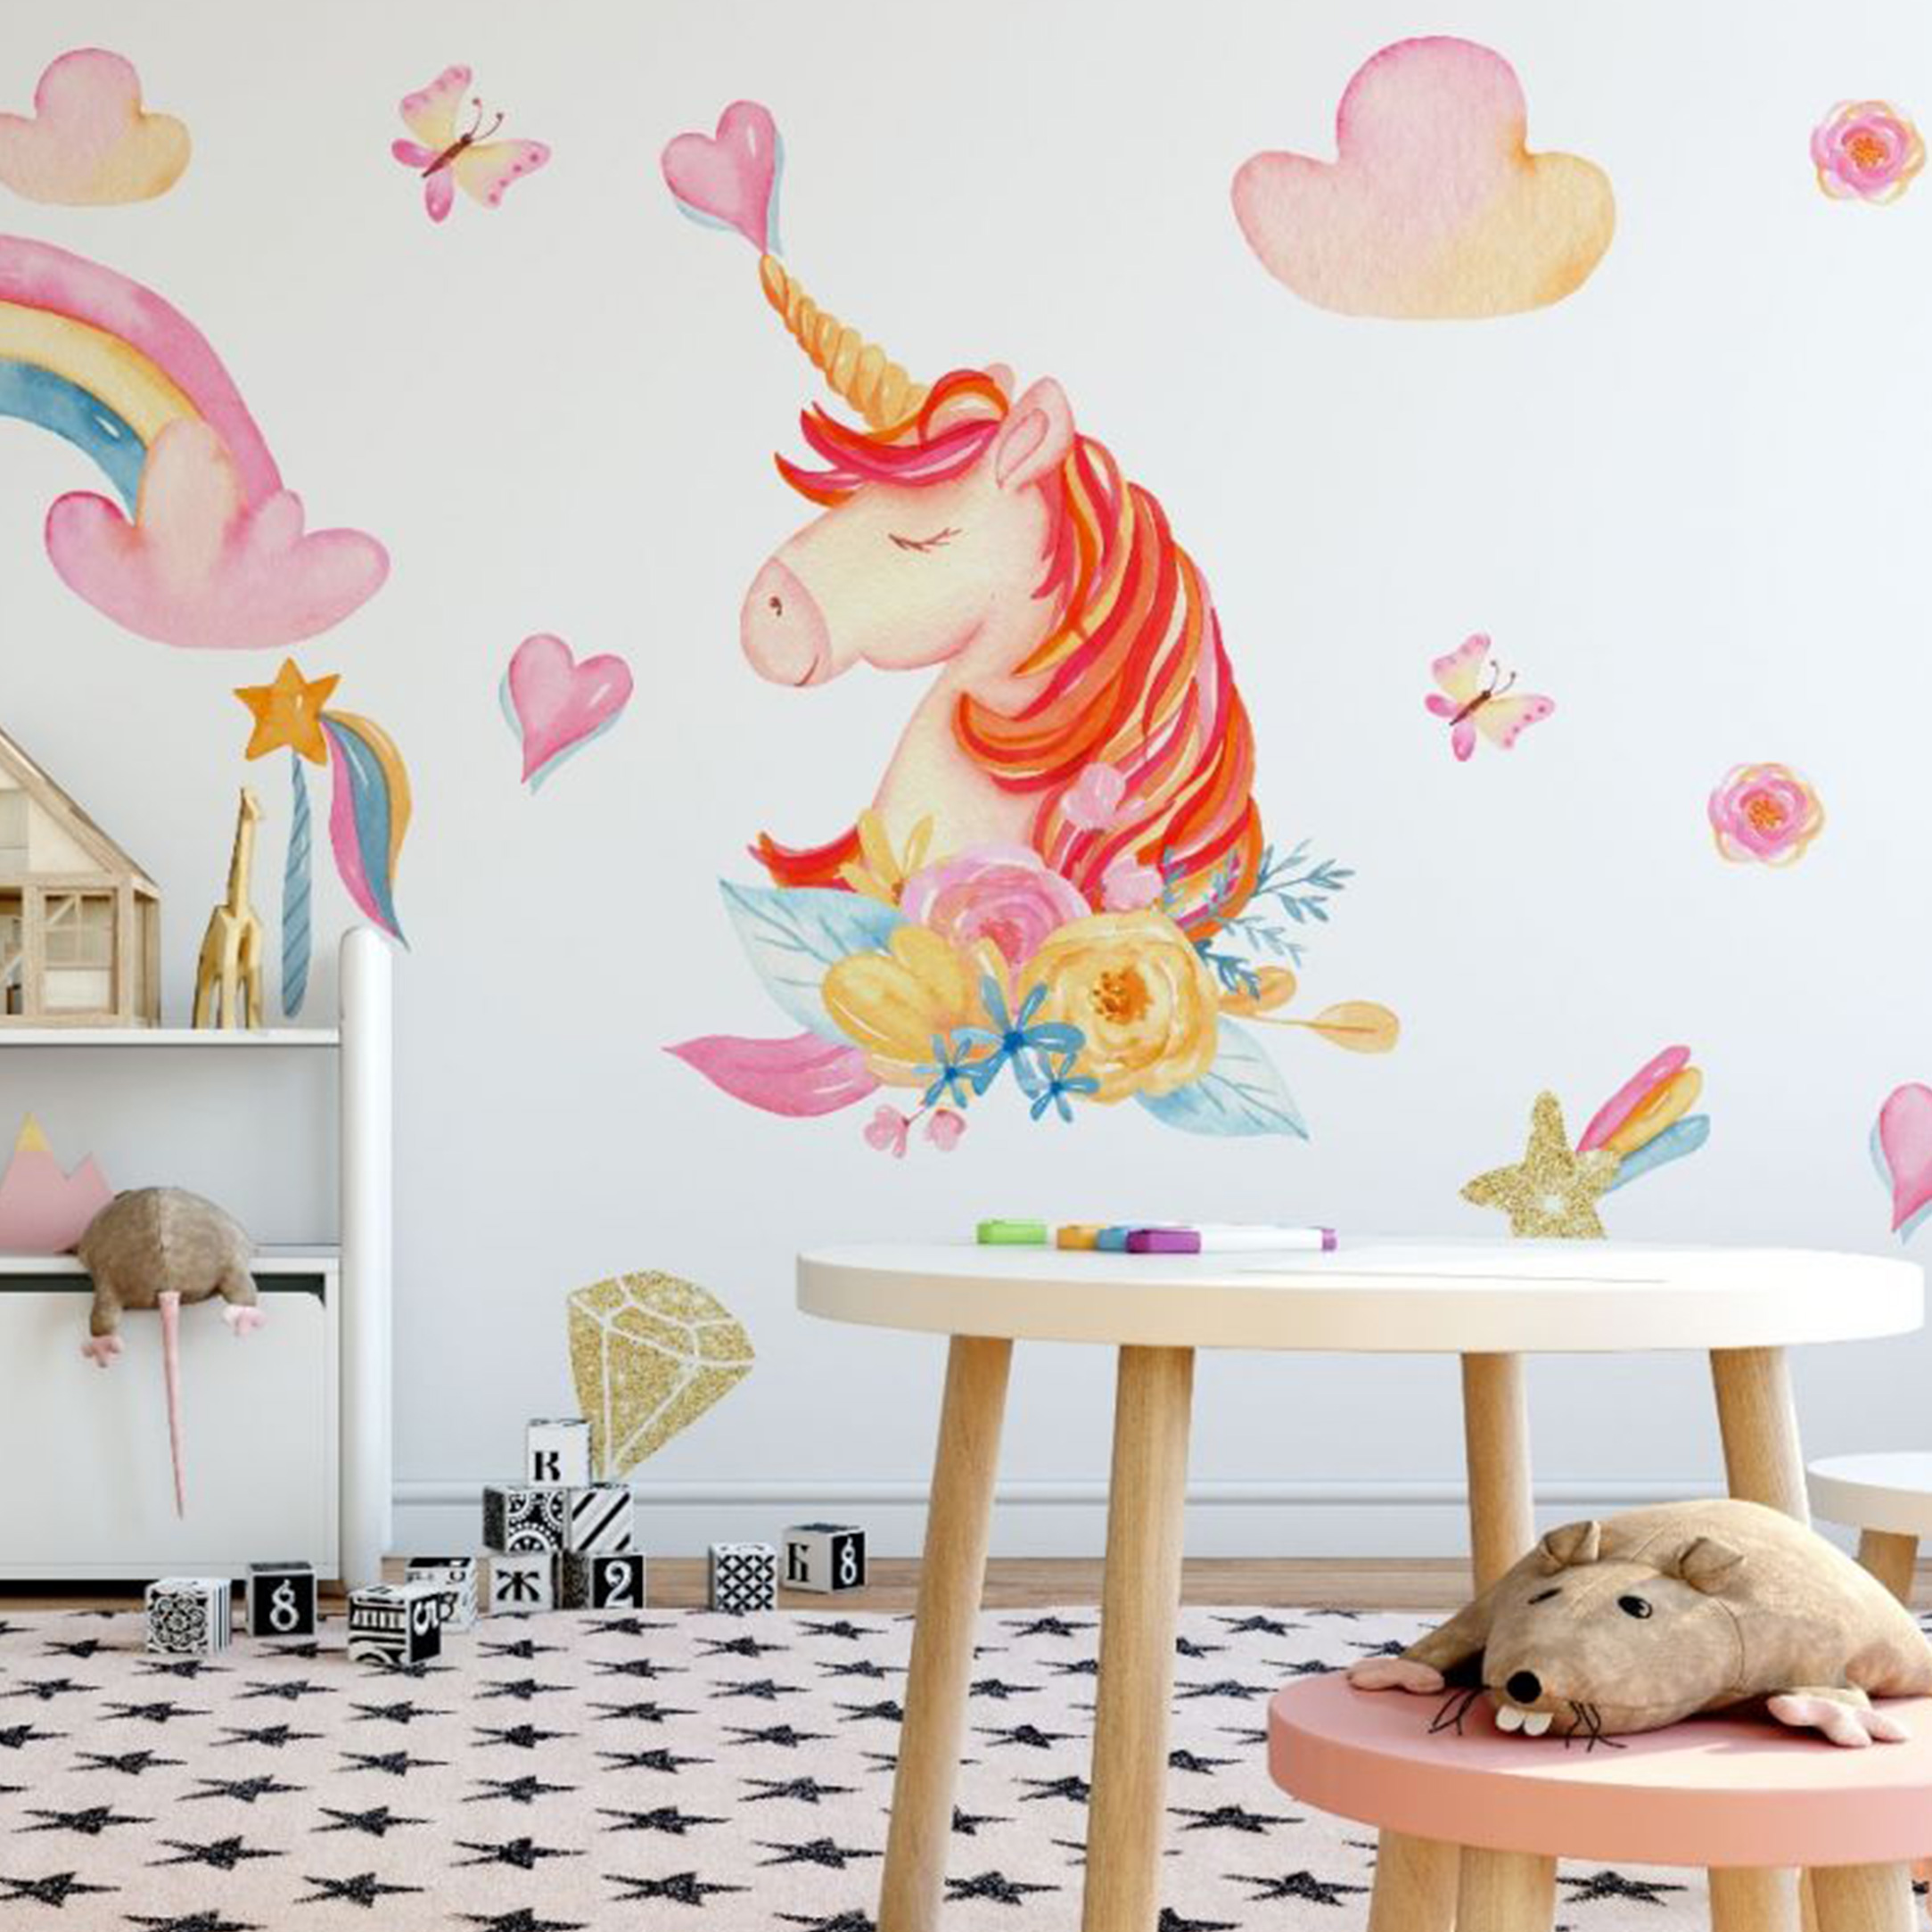 Unicorn Wall Stickers— Making The Nursery A Place Of Fun And Reflection